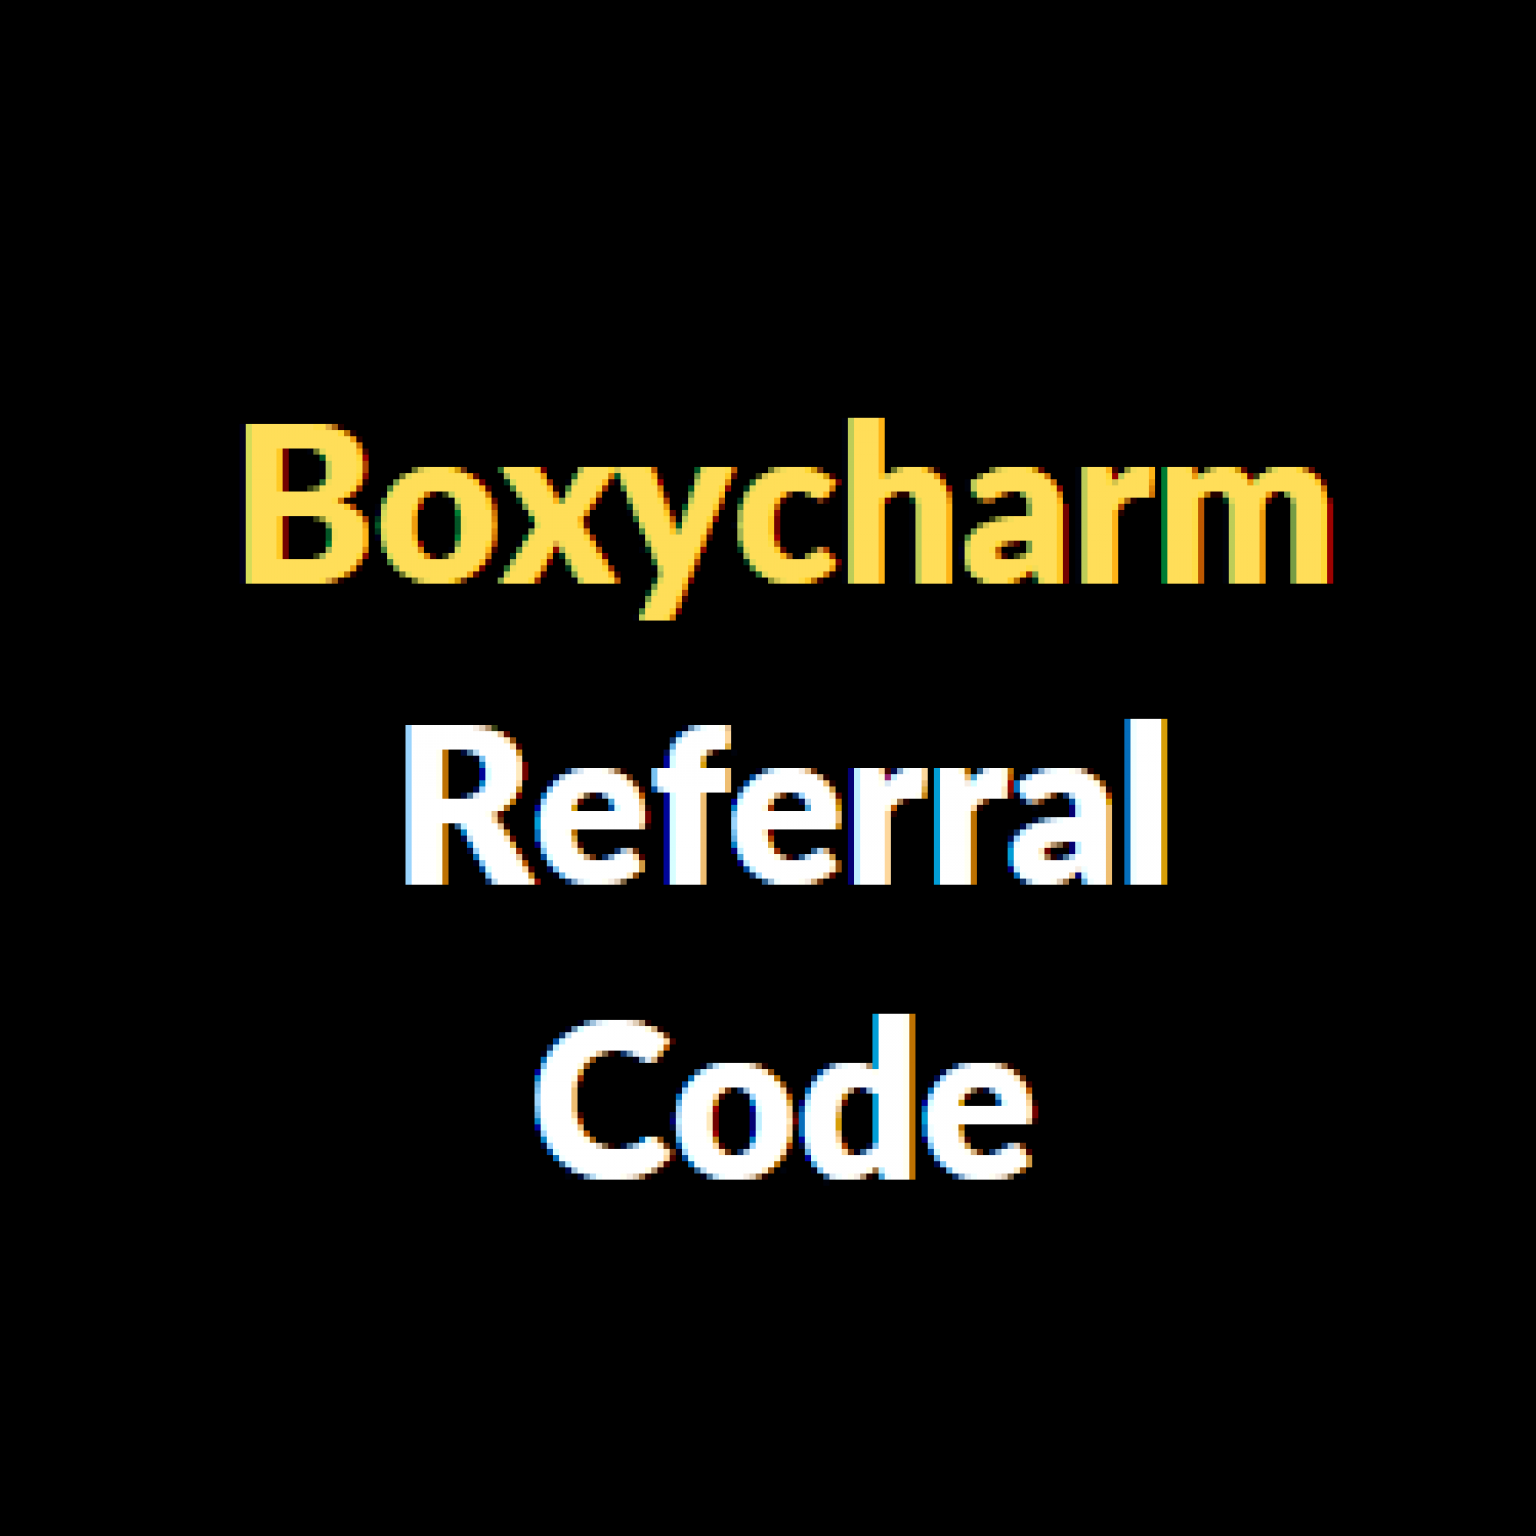 Boxycharm Referral Code [2021] Get Free Gift Up to 75